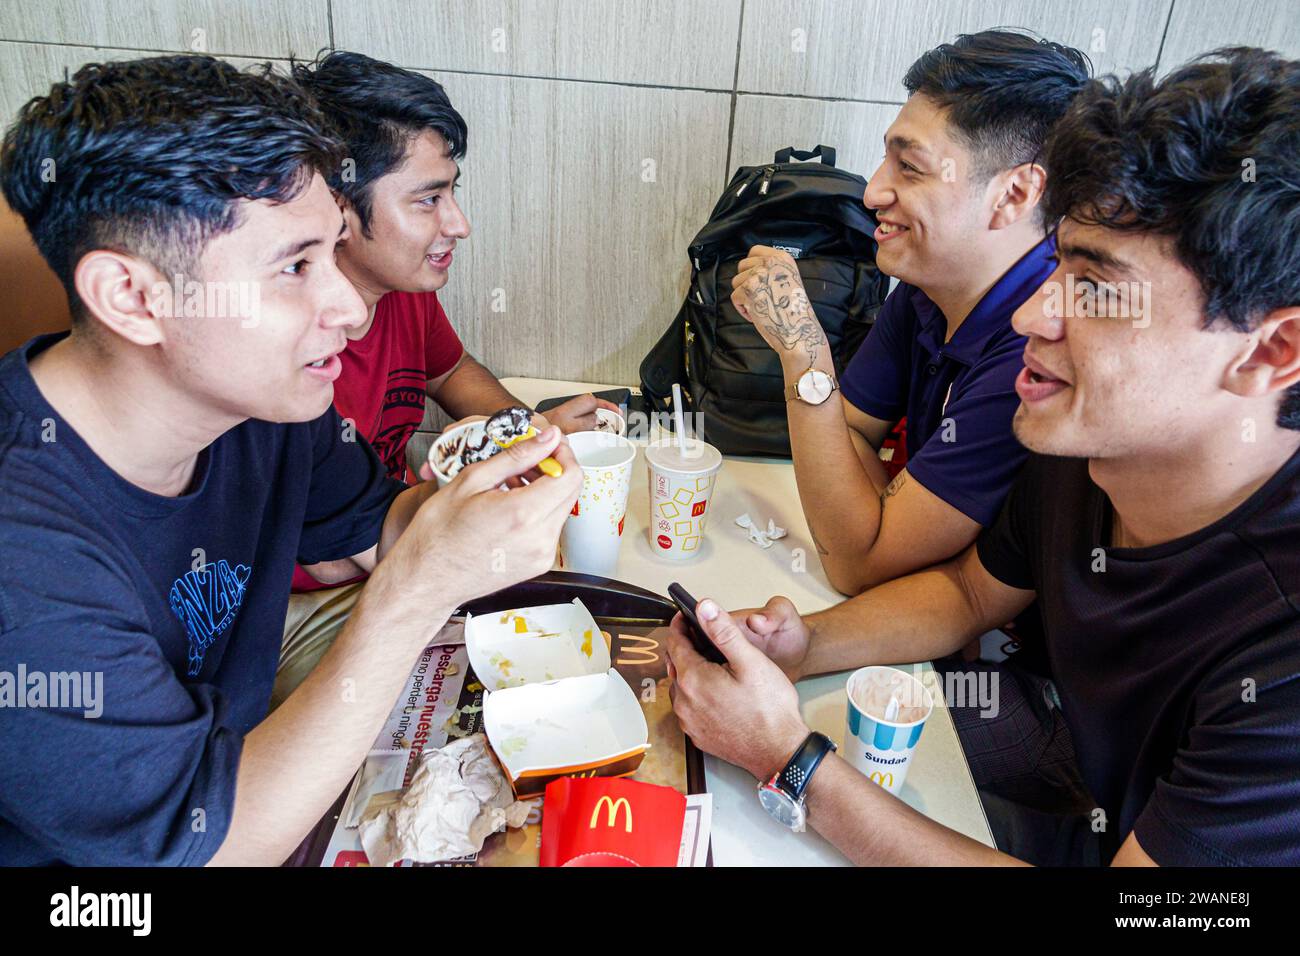 Merida Mexico,centro historico central historic district,McDonald's fast food,eating talking,teen teenage teenager,youth culture adolescent,resident b Stock Photo